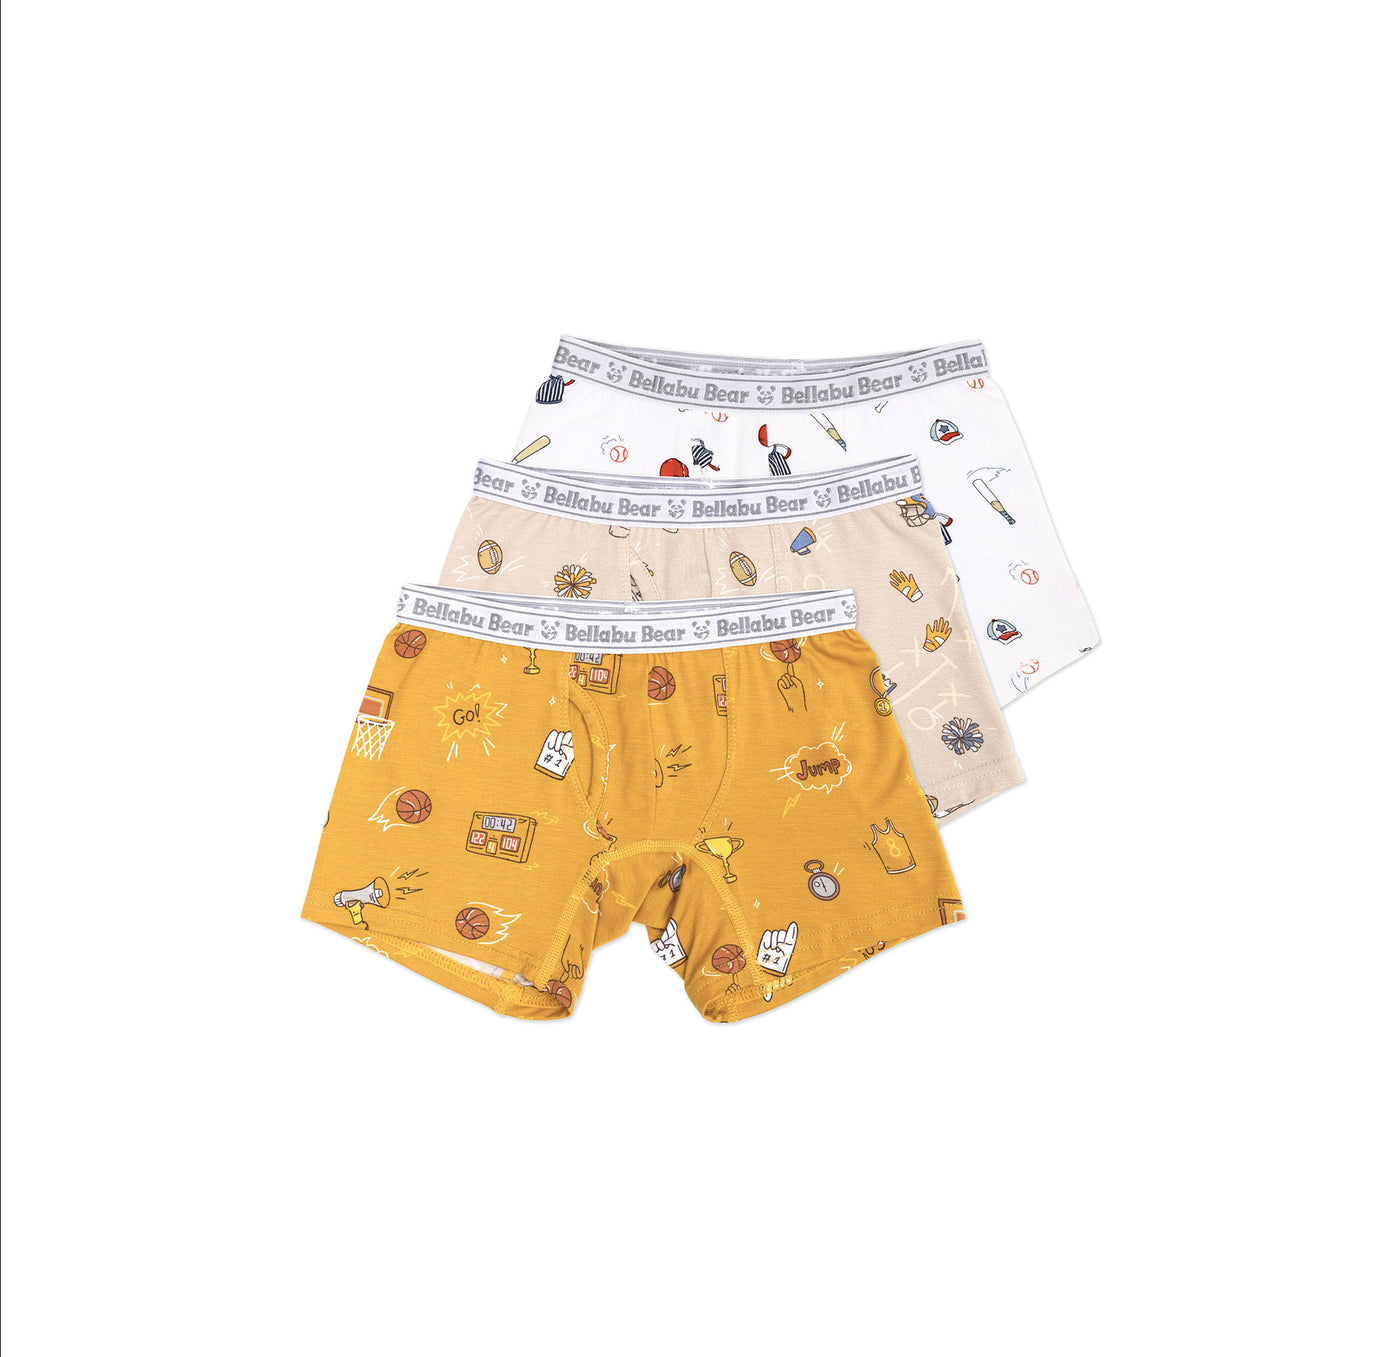 Sports Bamboo Boy's Boxer Brief 3-Pack